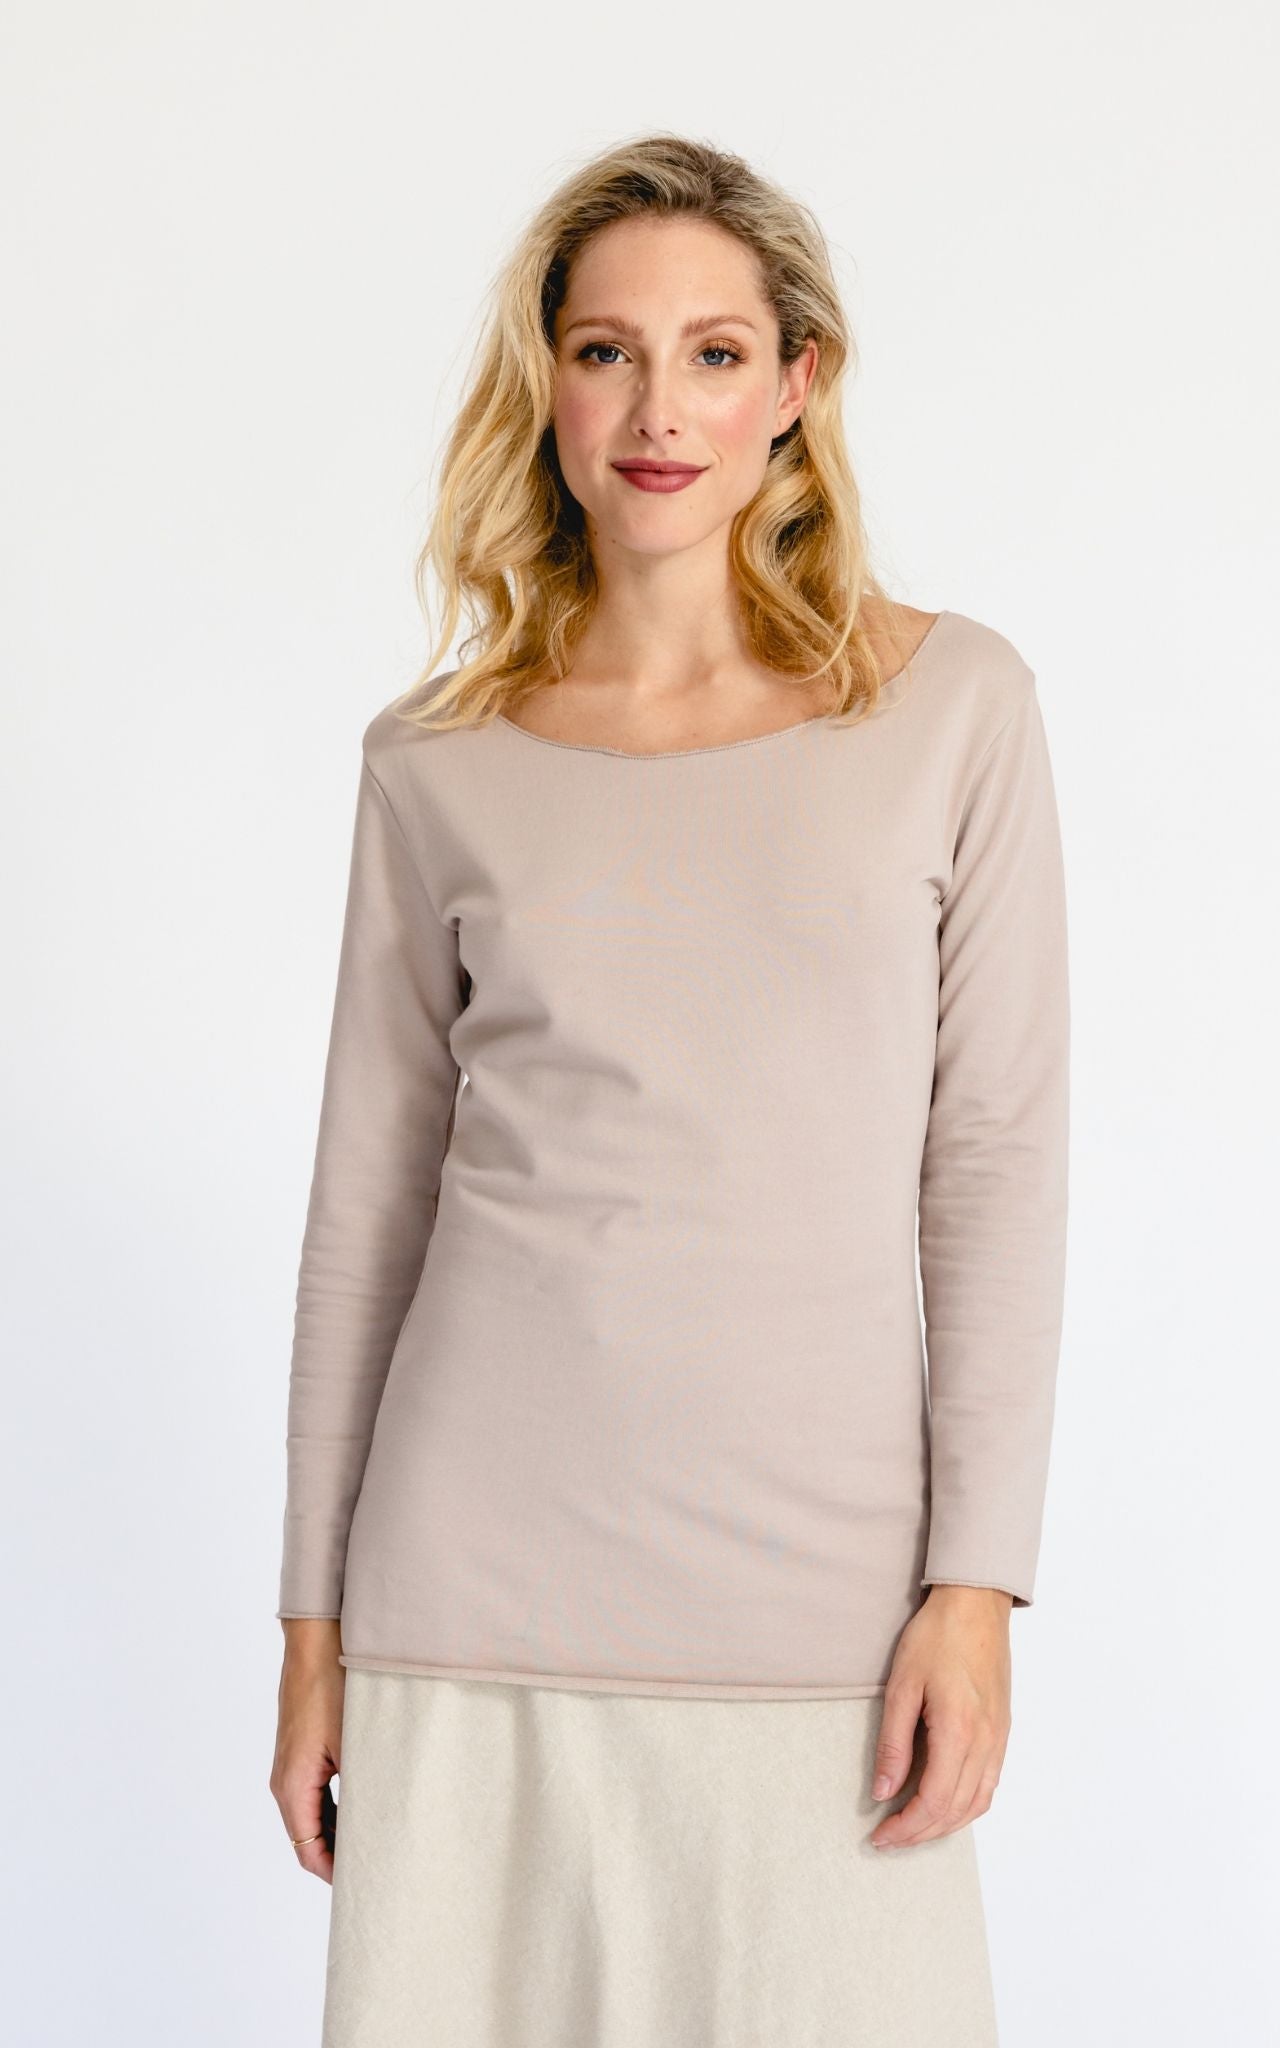 Surya Australia Ethical Organic Cotton 'Isiola' Top made in Nepal - Oyster